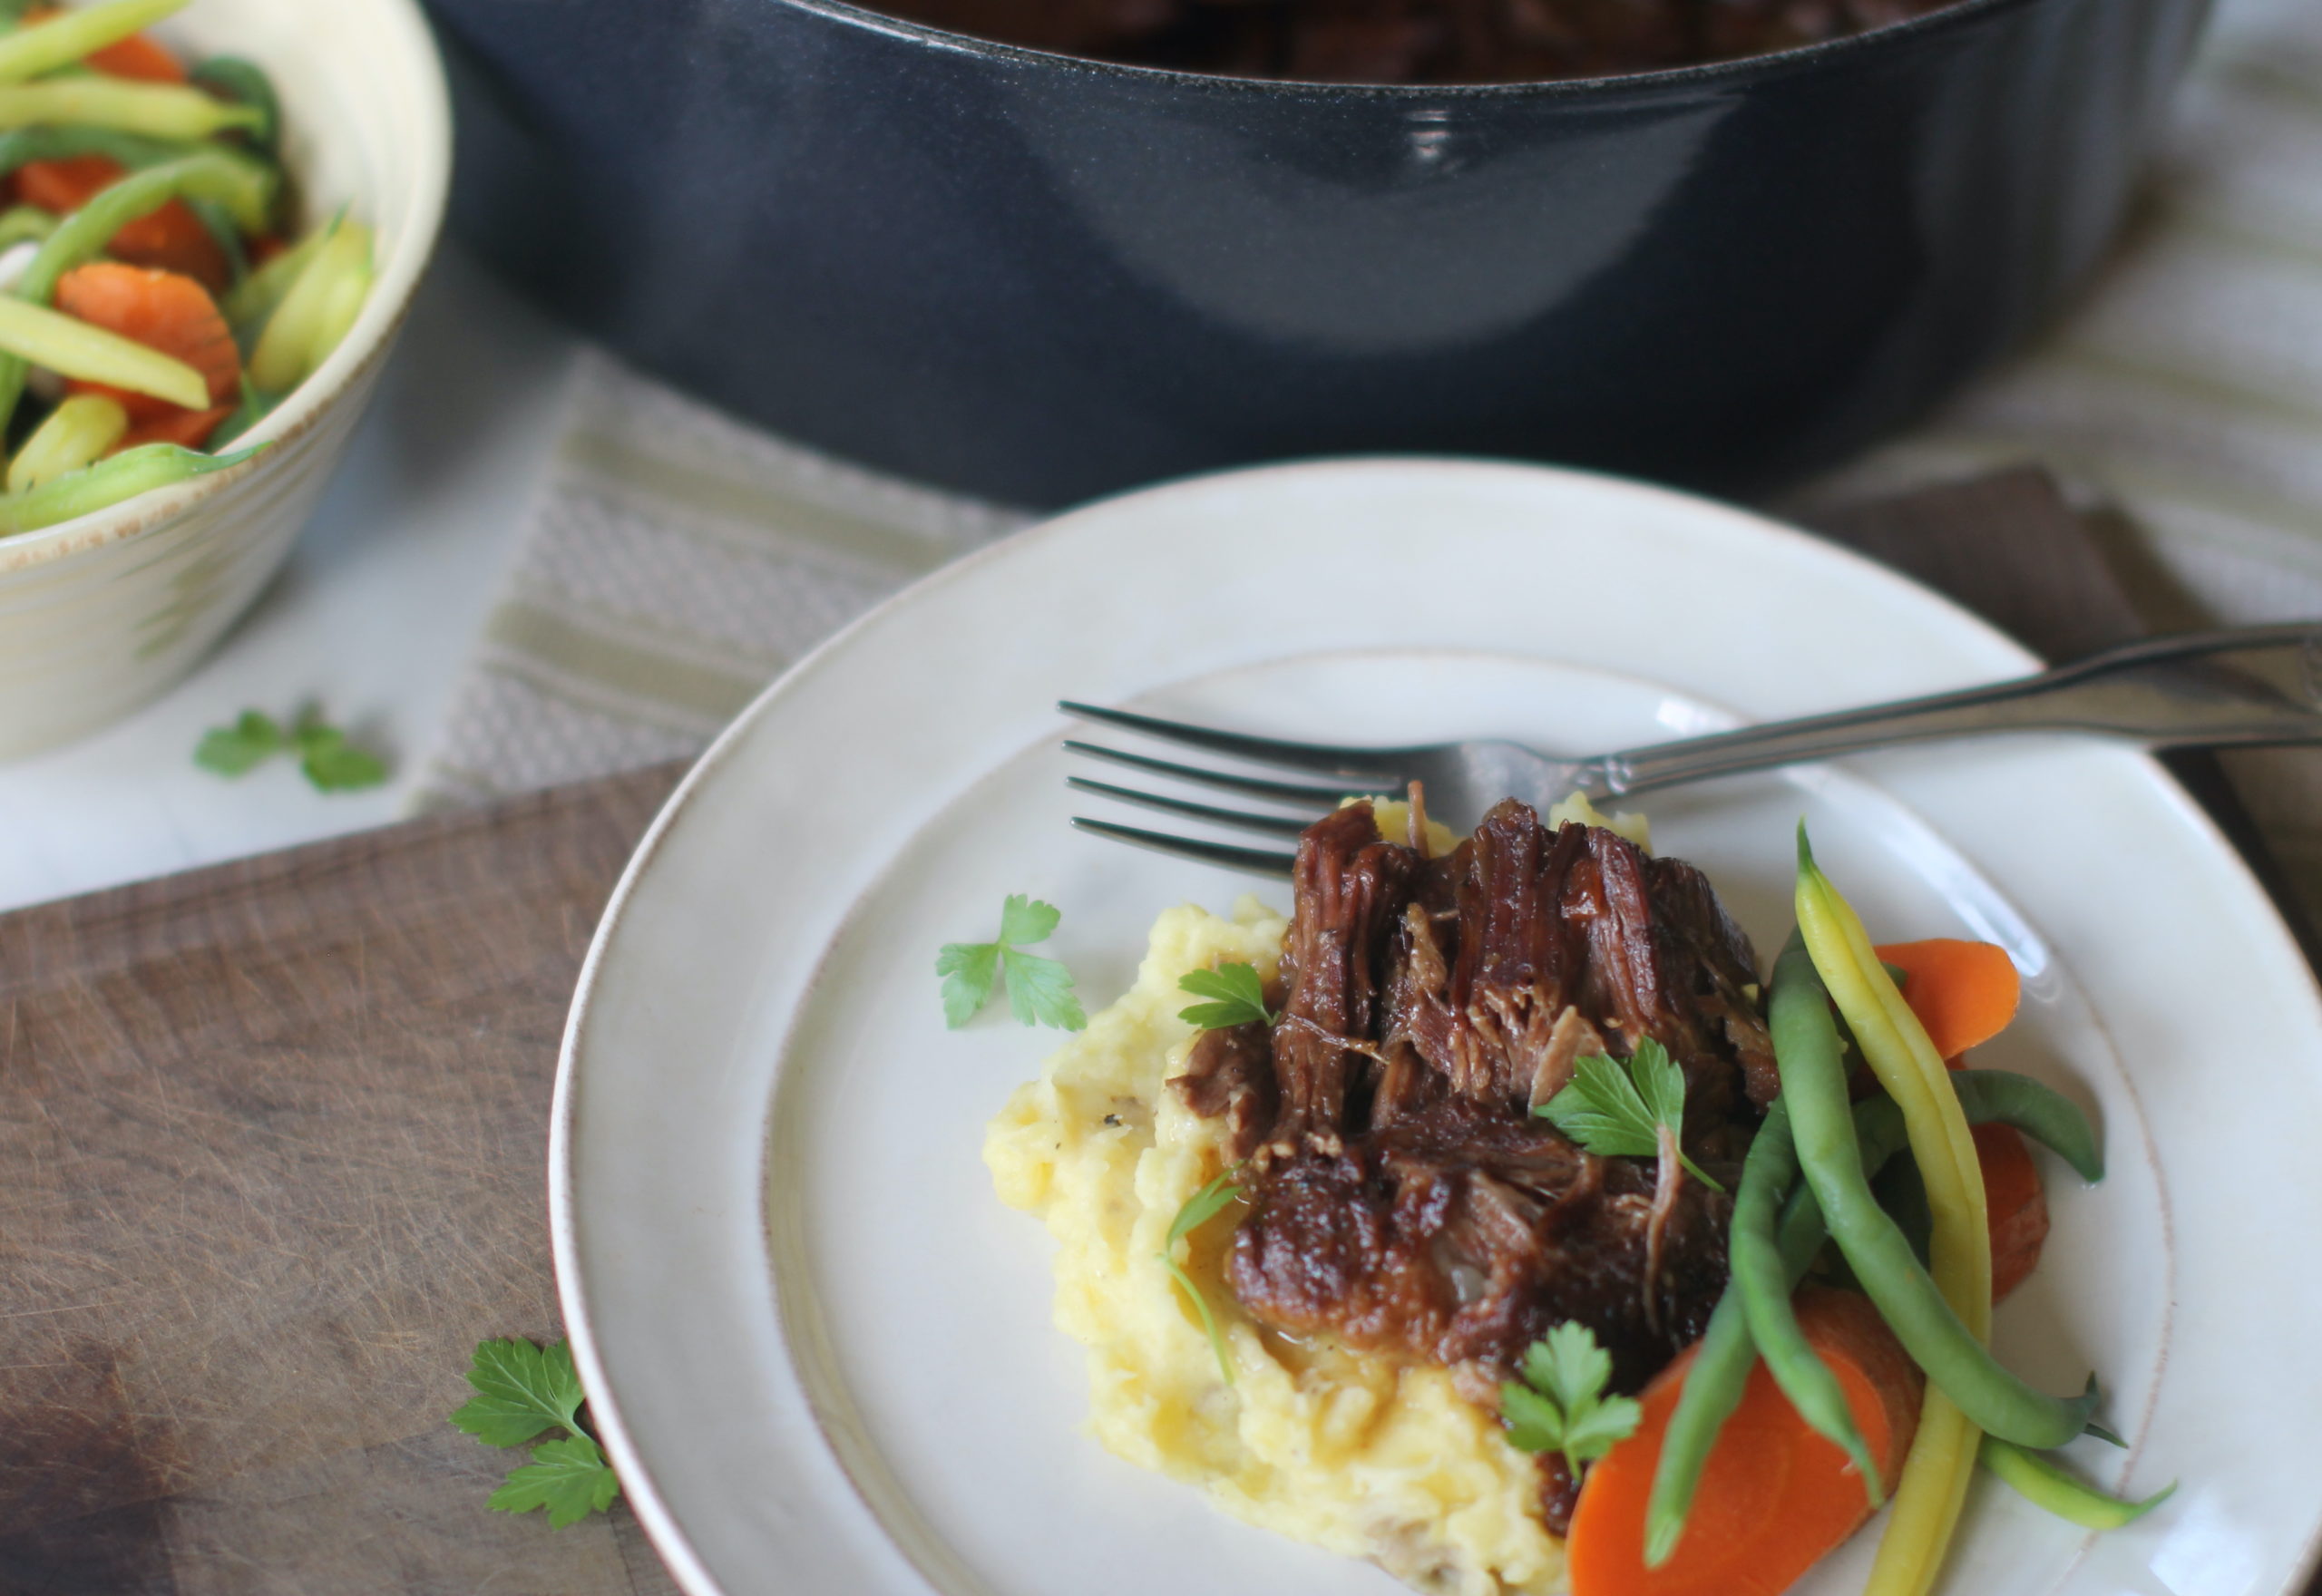 Simply Perfect Beef Roast with Mashed Potatoes, Carrots and Green Beans